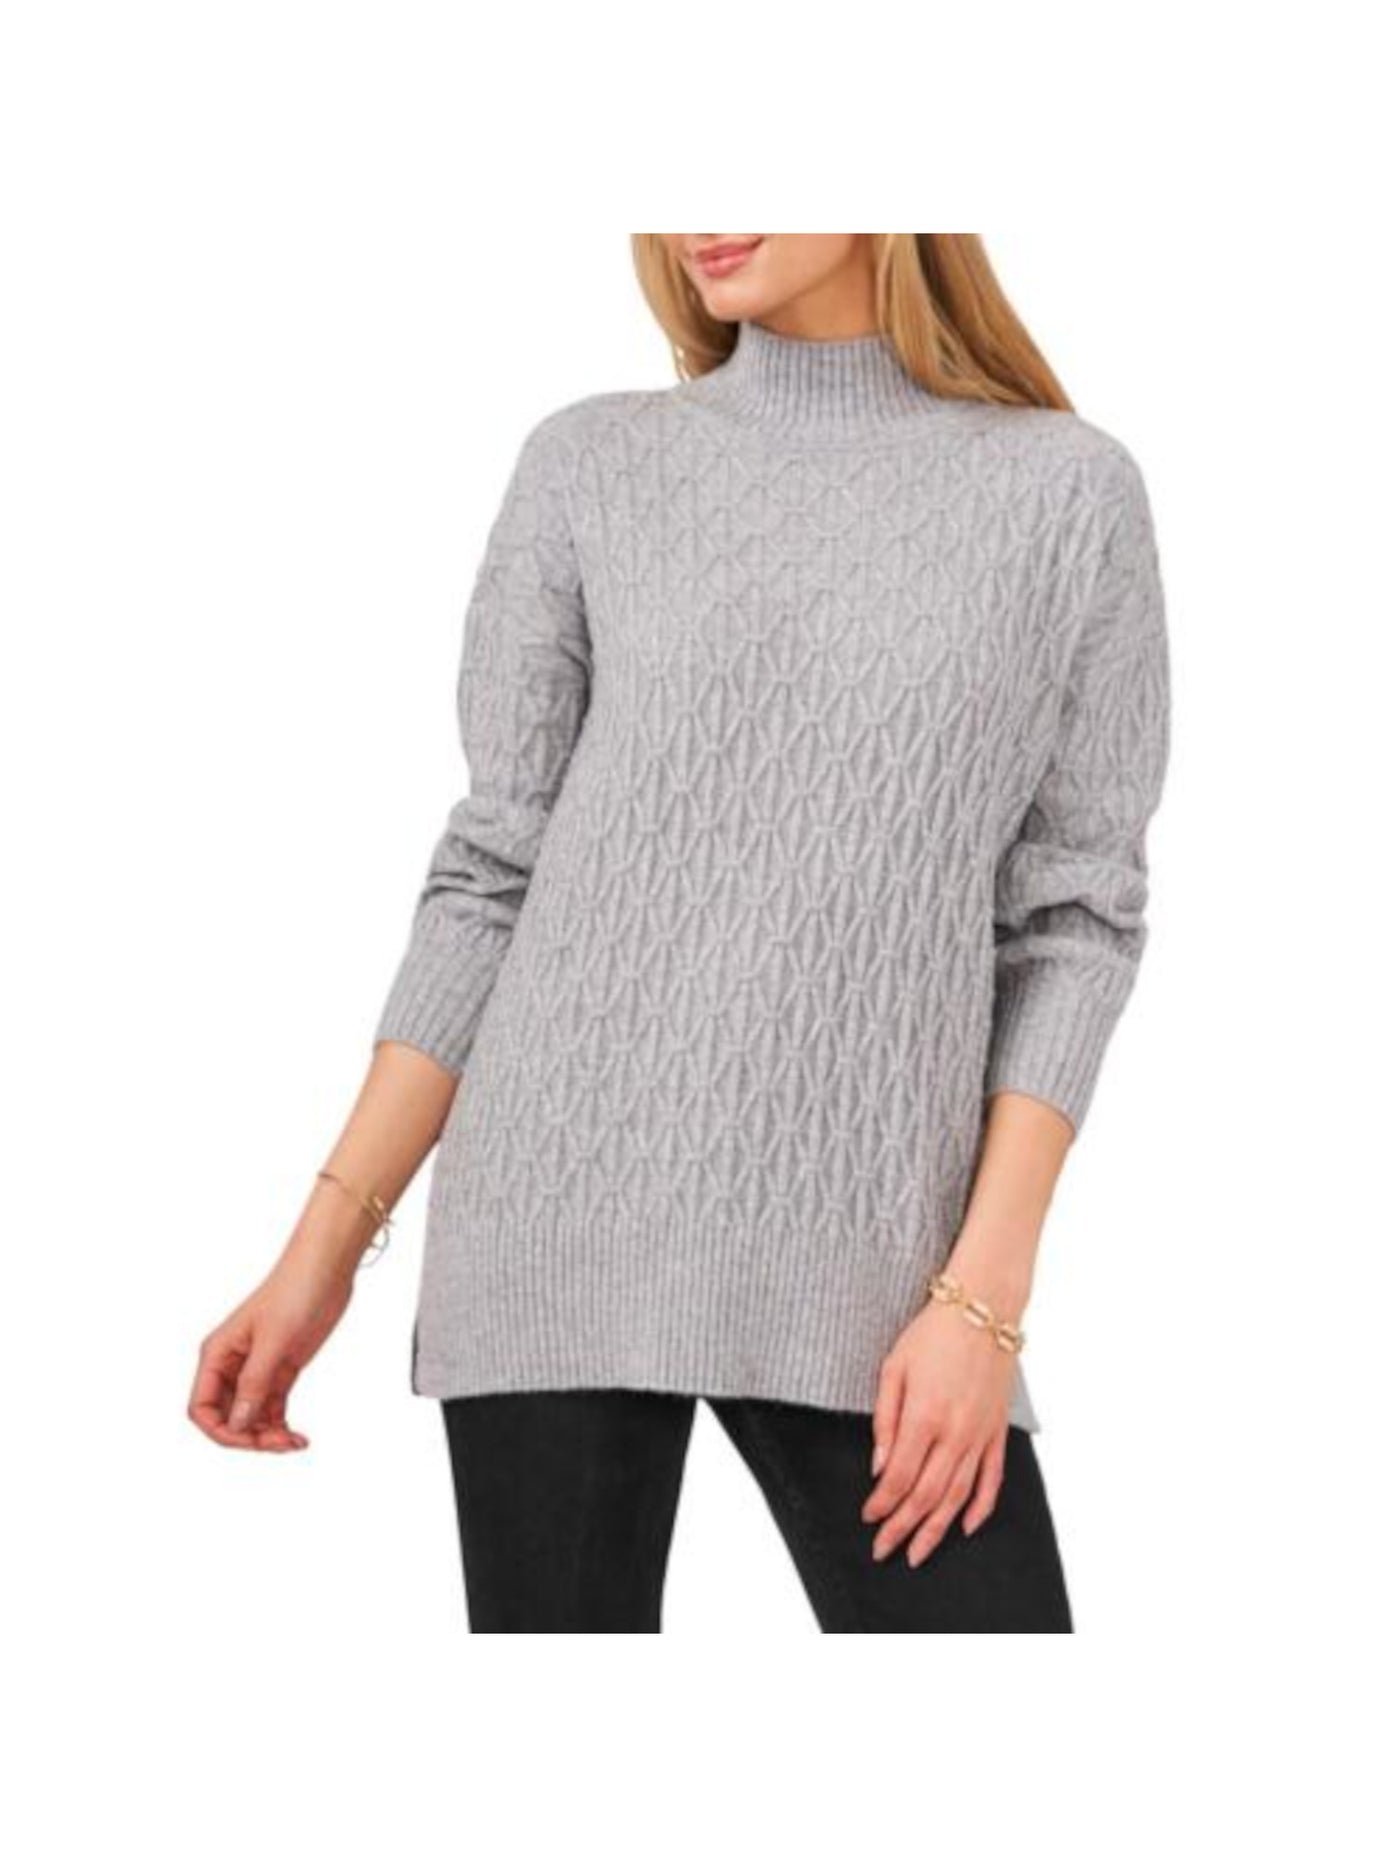 VINCE CAMUTO Womens Gray Knit Long Sleeve Turtle Neck Sweater XL